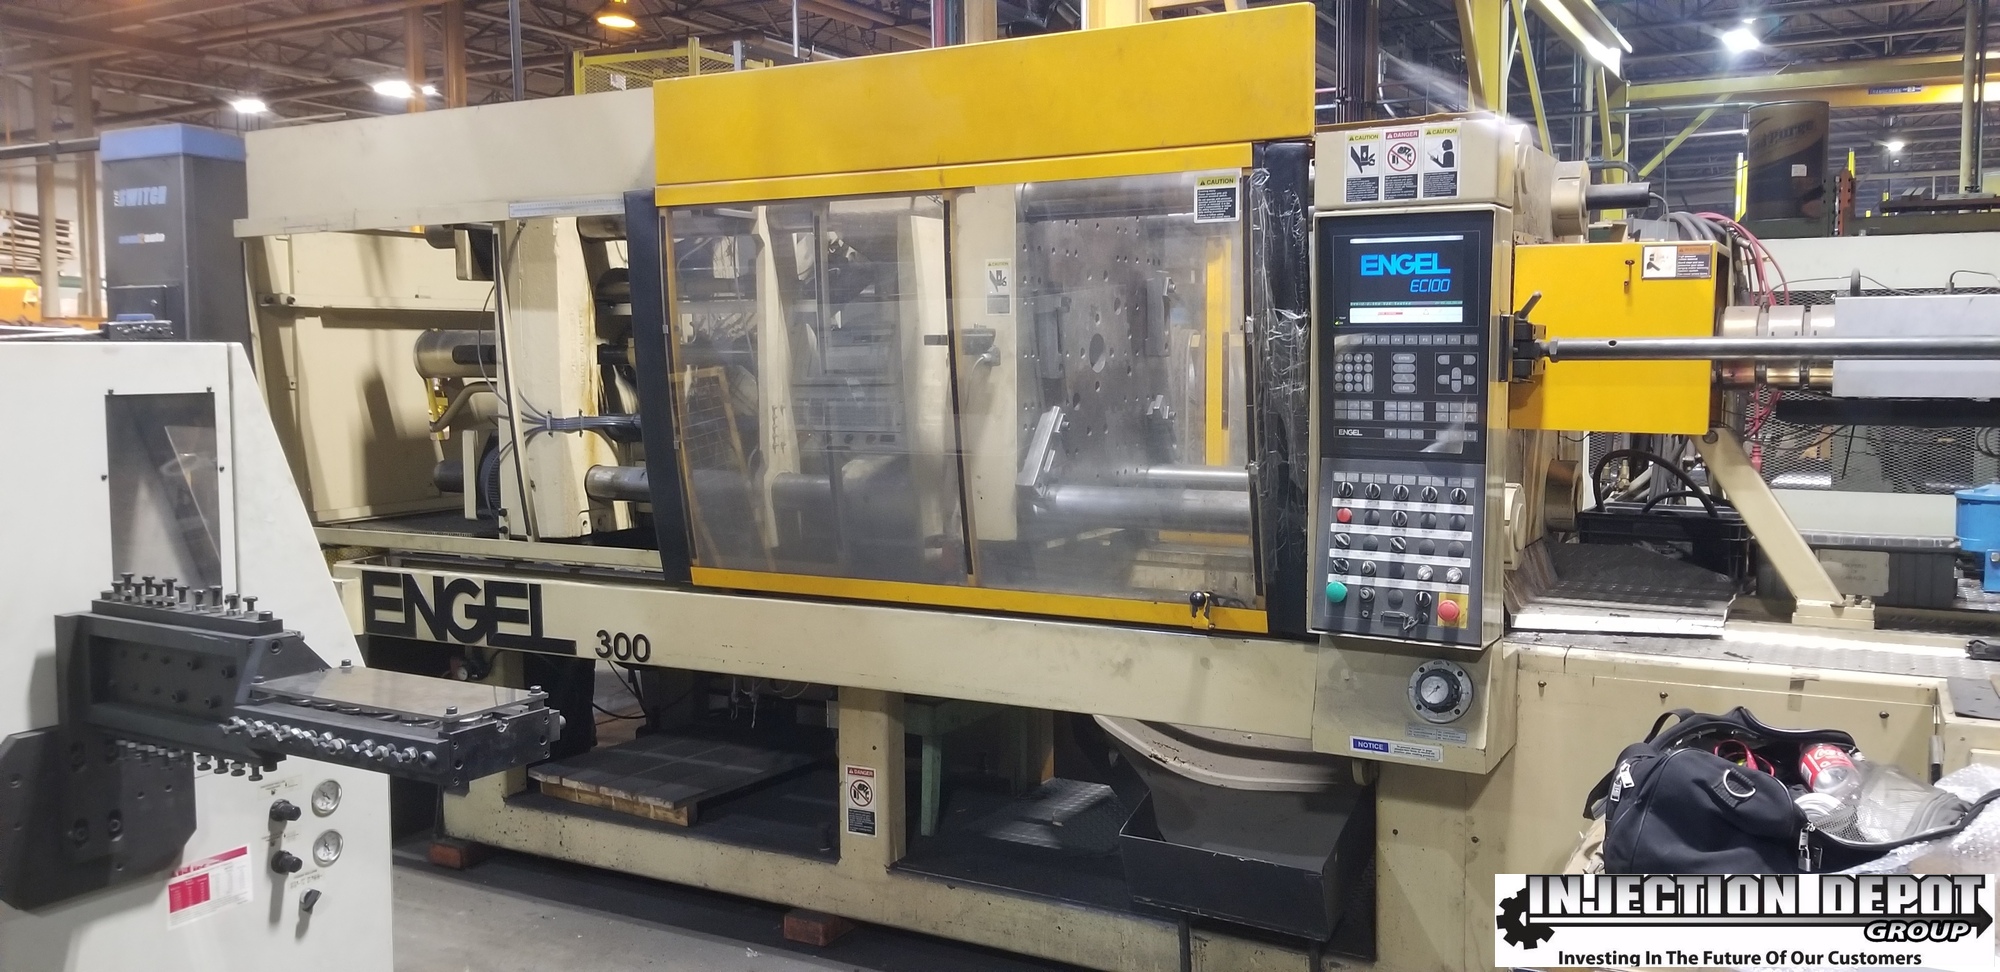 2001 ENGEL ES1300/300 Horizontal Injection Moulding Machines | INJECTION DEPOT GROUP